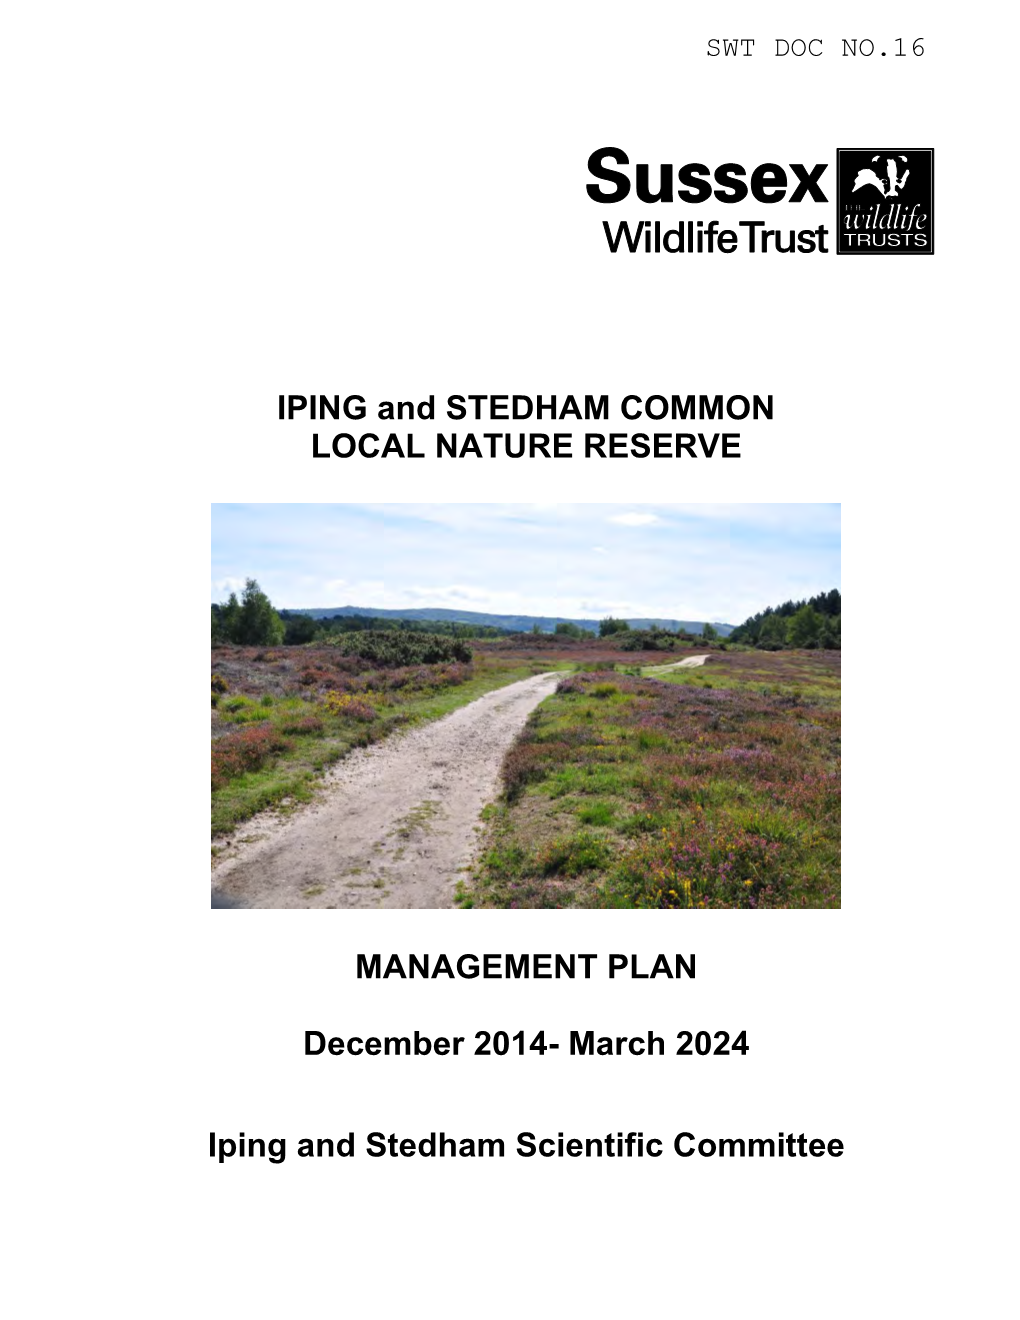 IPING and STEDHAM COMMON LOCAL NATURE RESERVE